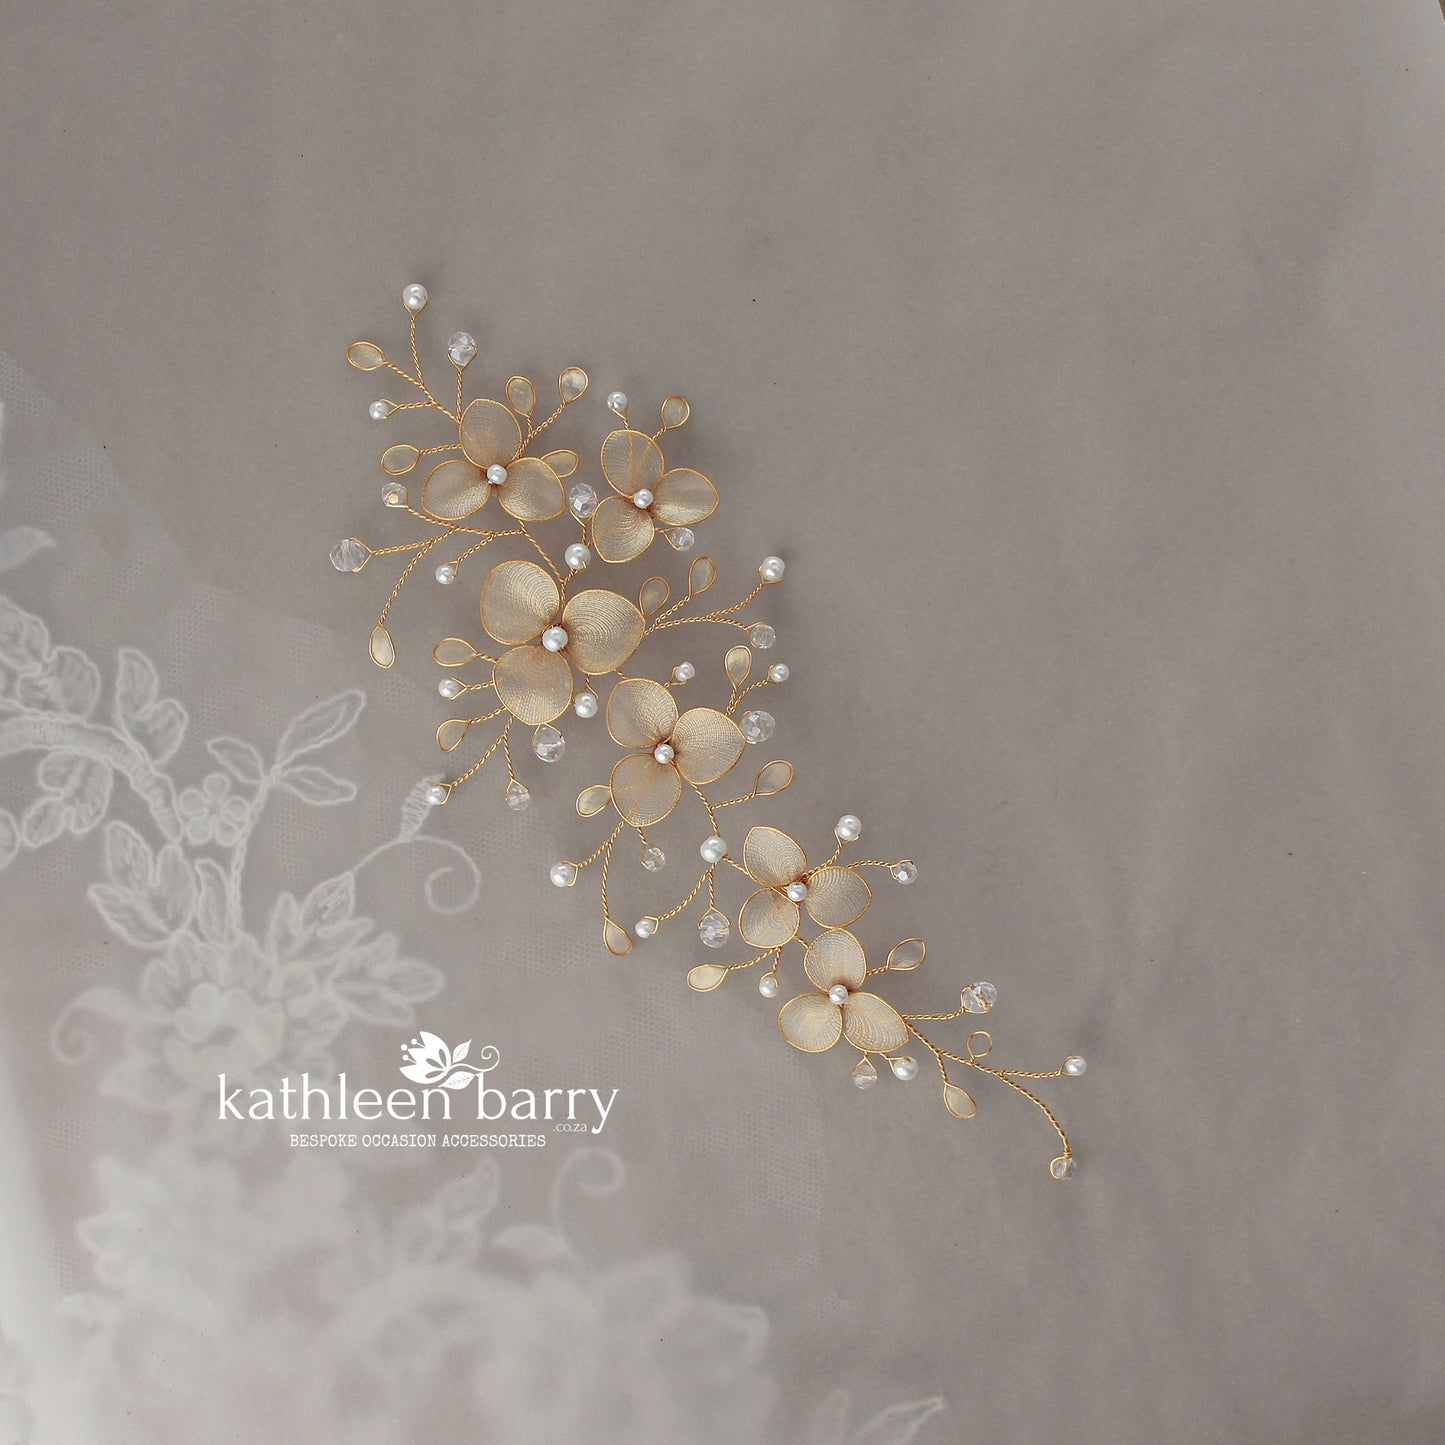 Madelene floral wedding hairpiece, semi opaque flower and leaf detailing, with crystals and seed pearls - Assorted colors available : Gold, silver and rose gold